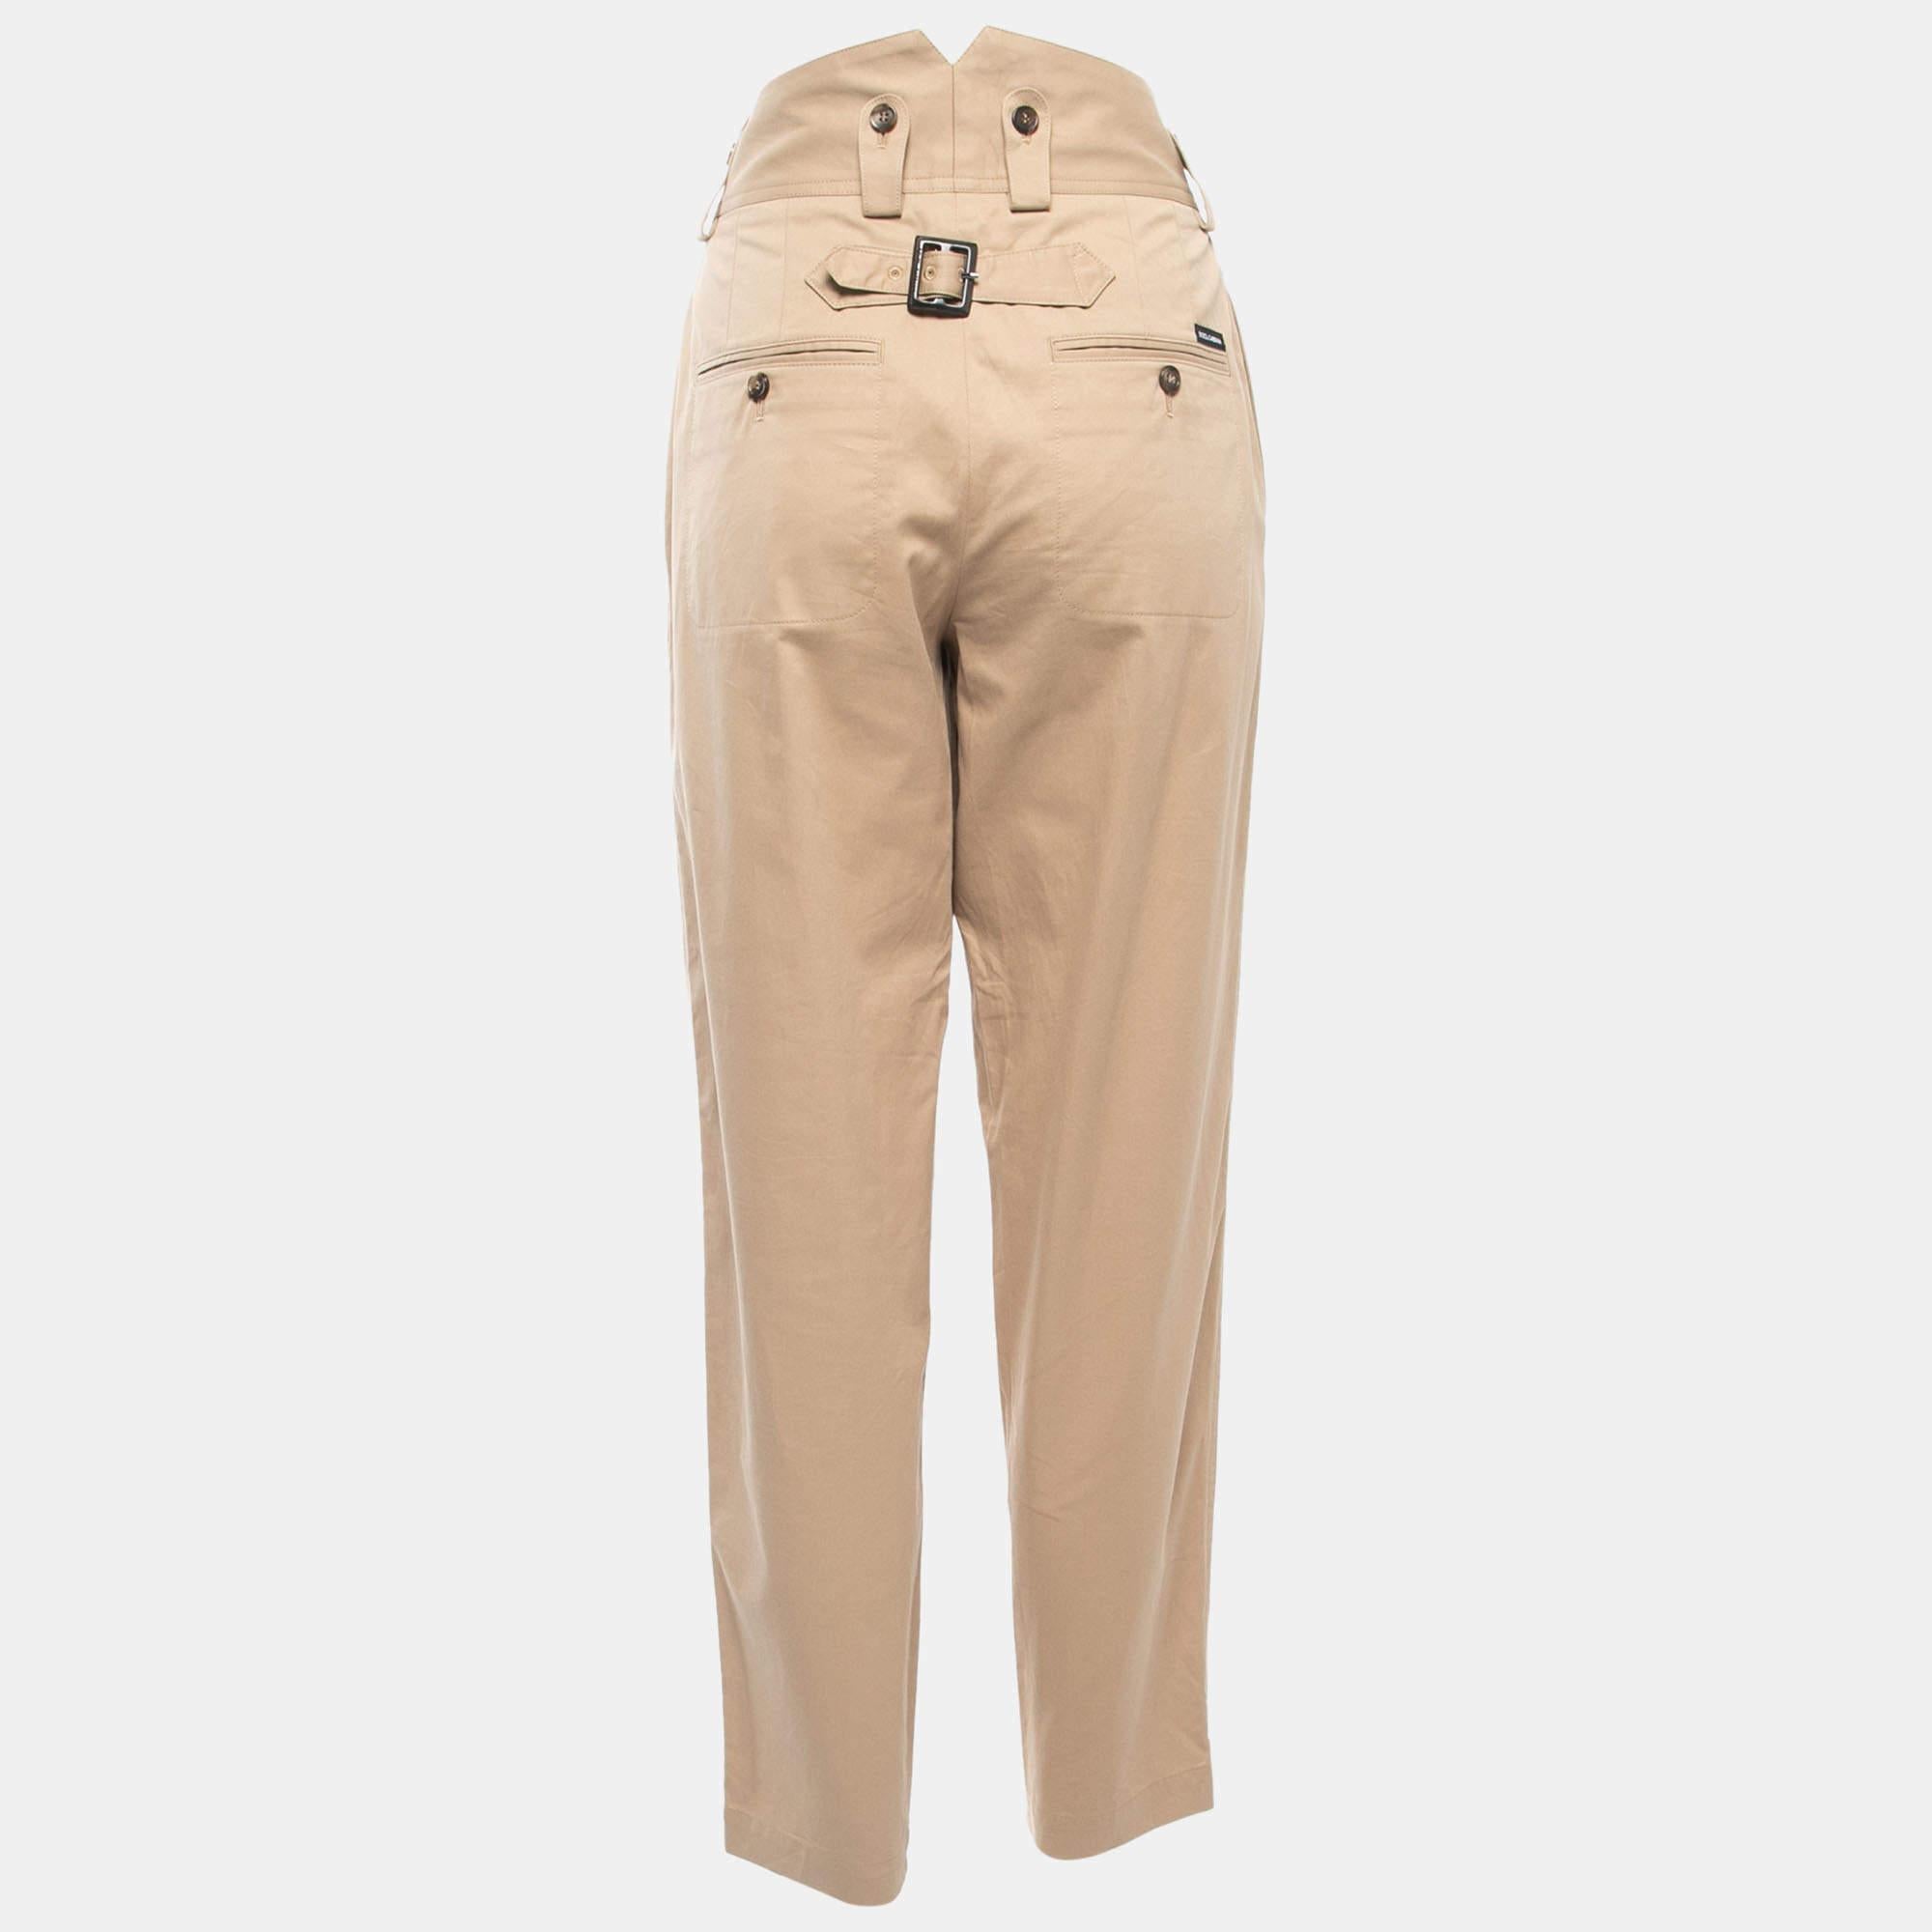 Experience the charm of designer clothing with this pair of pants by Dolce & Gabbana. Team it up with a tailored blouse or a simple top and chic shoes.

